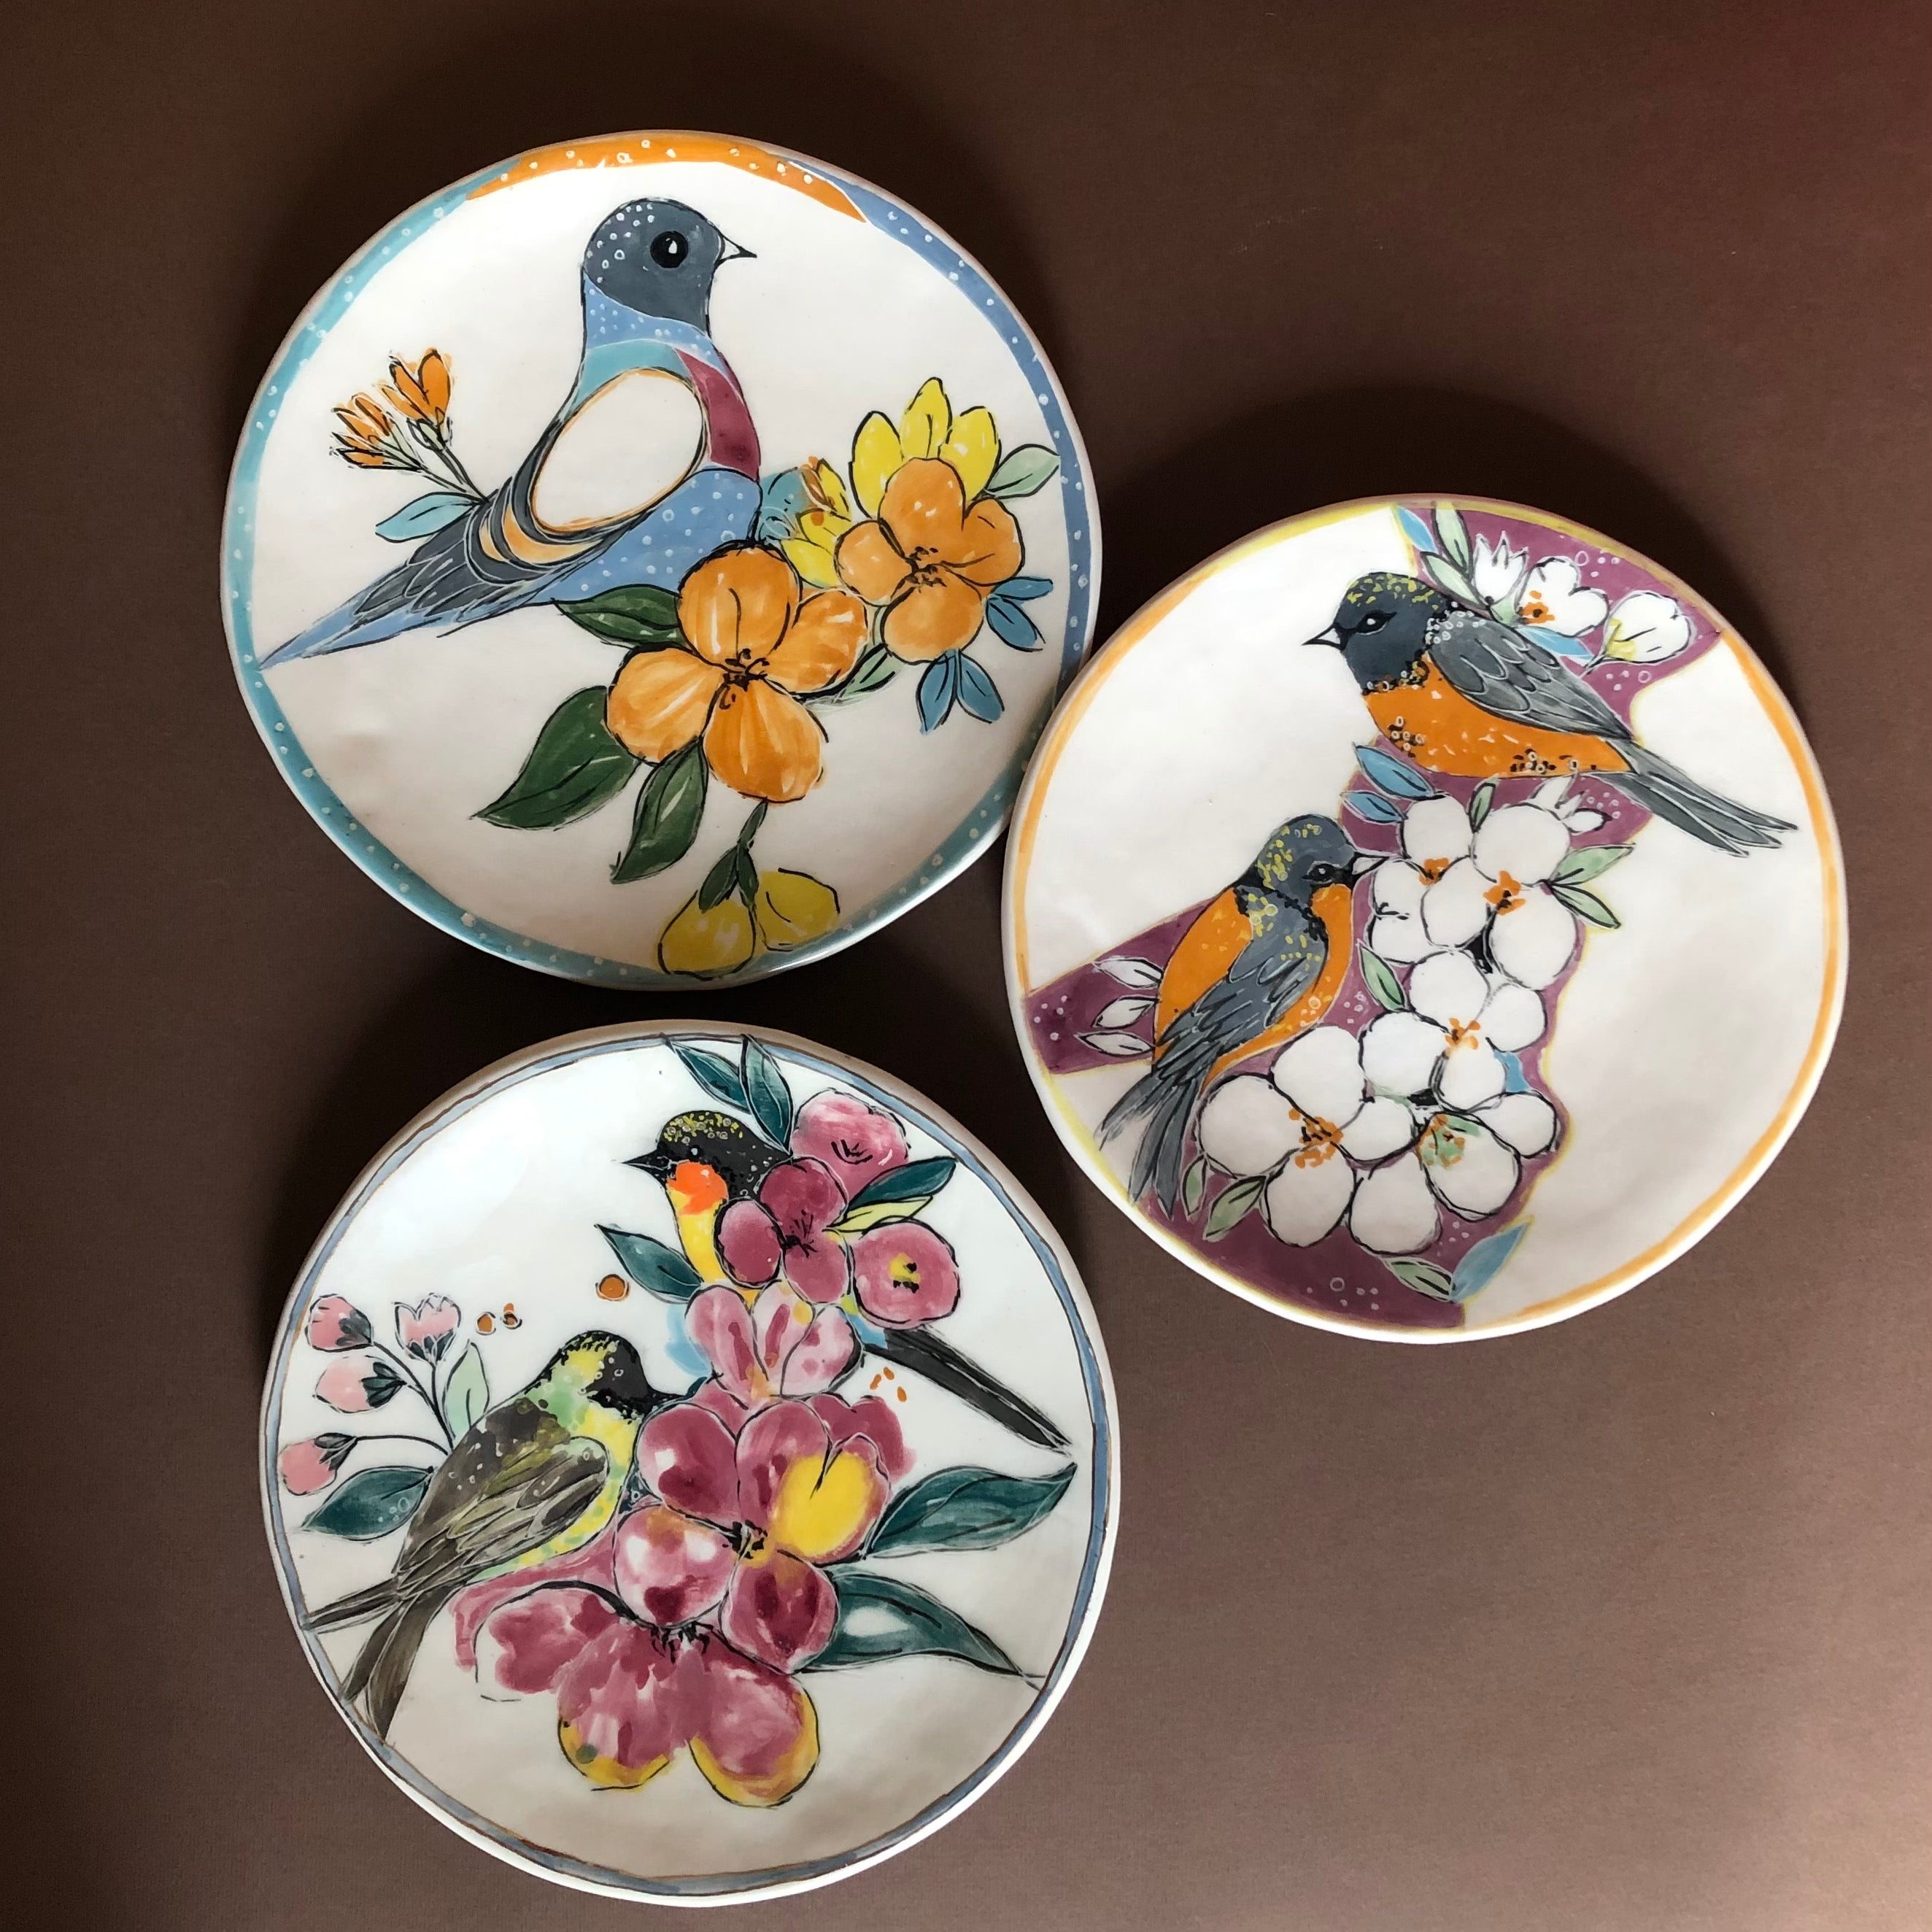 Wall Decorative Hand painted Ceramic Plate with Birds